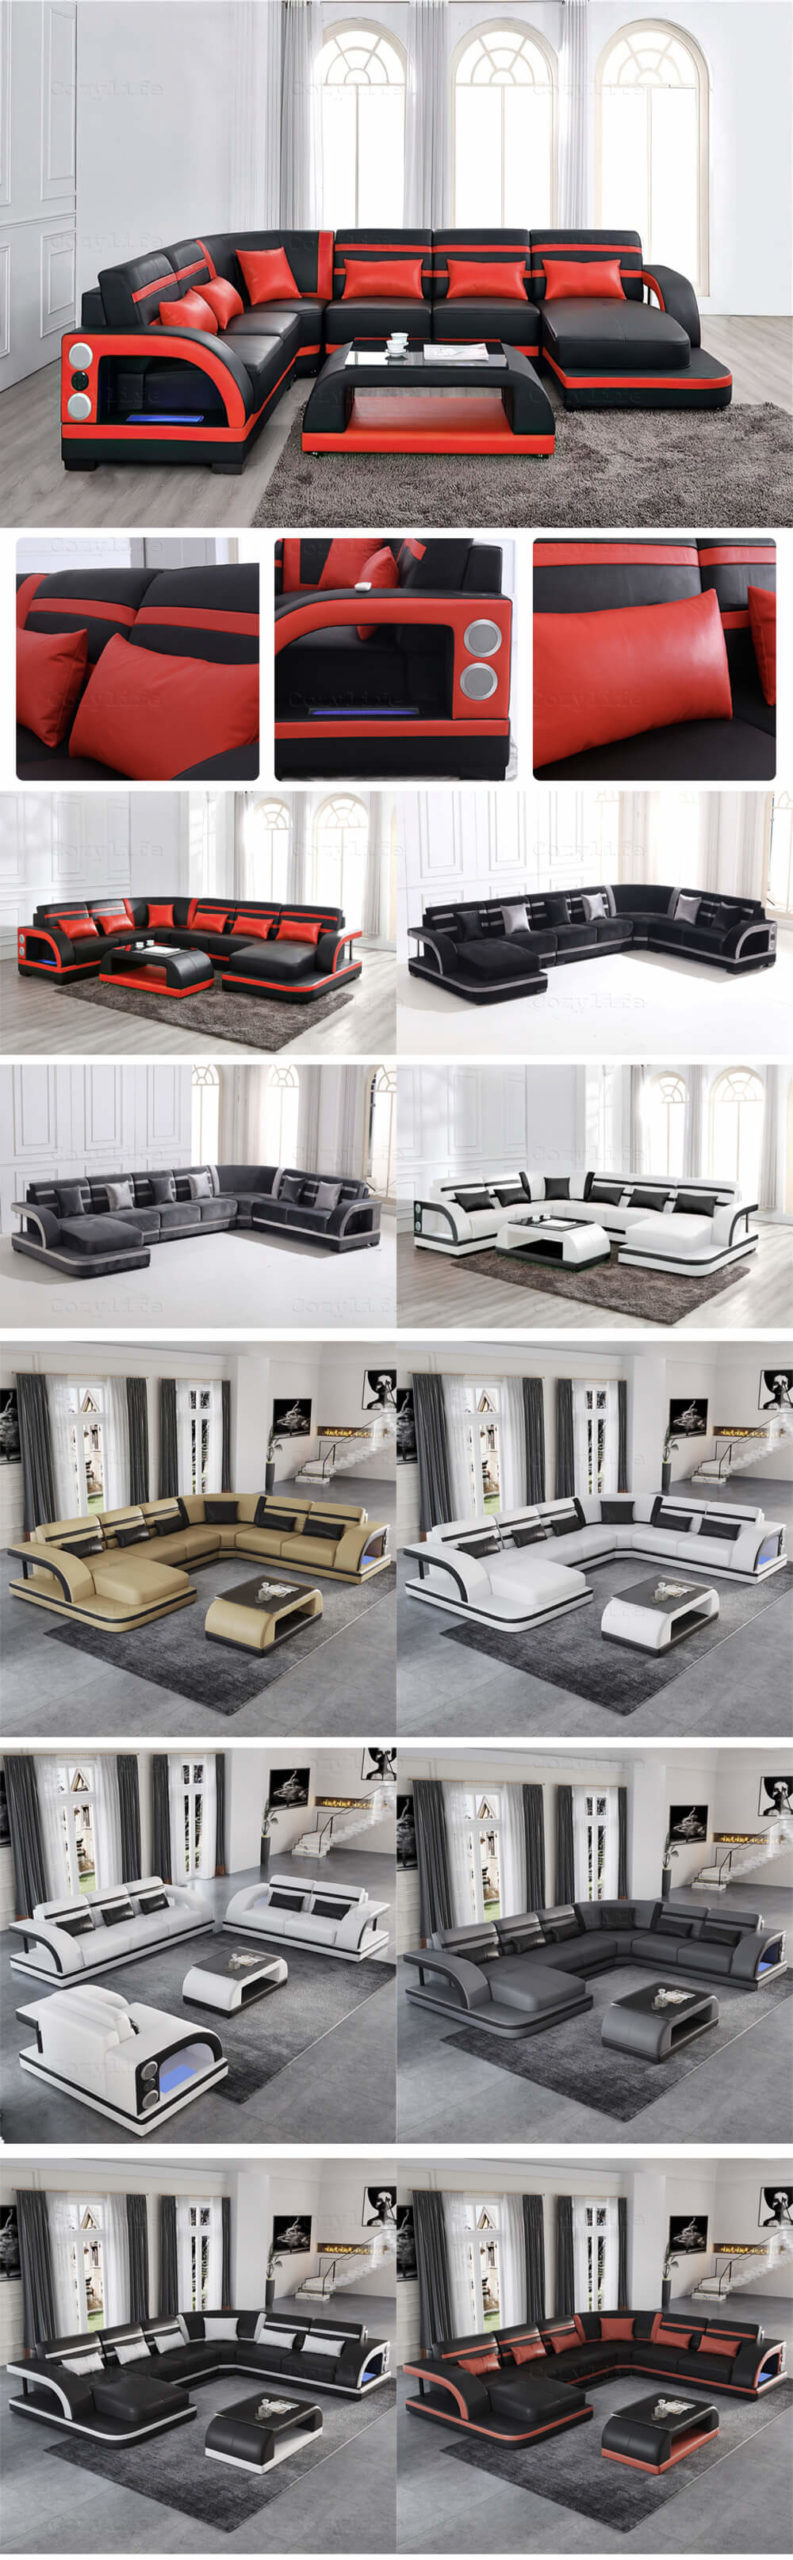 custom corner sectional couch from china in multi colors